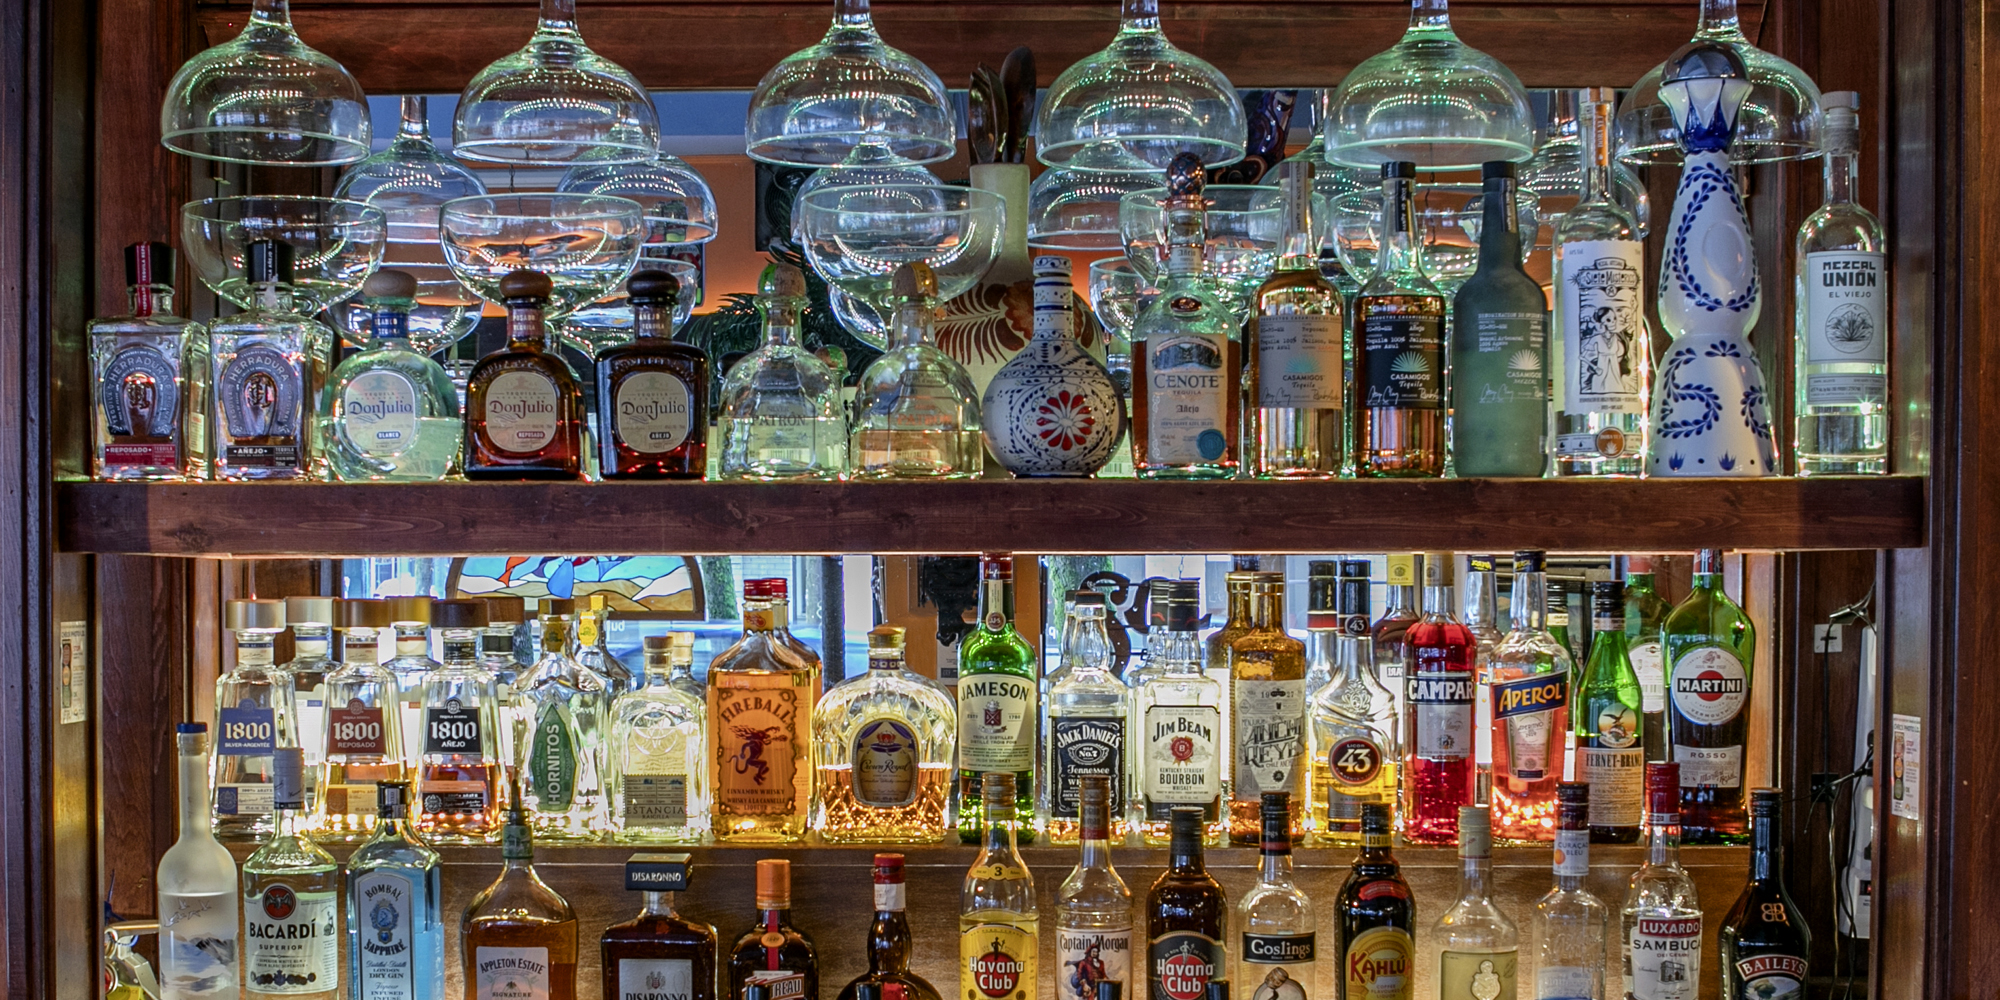 View of some bottles at the bar